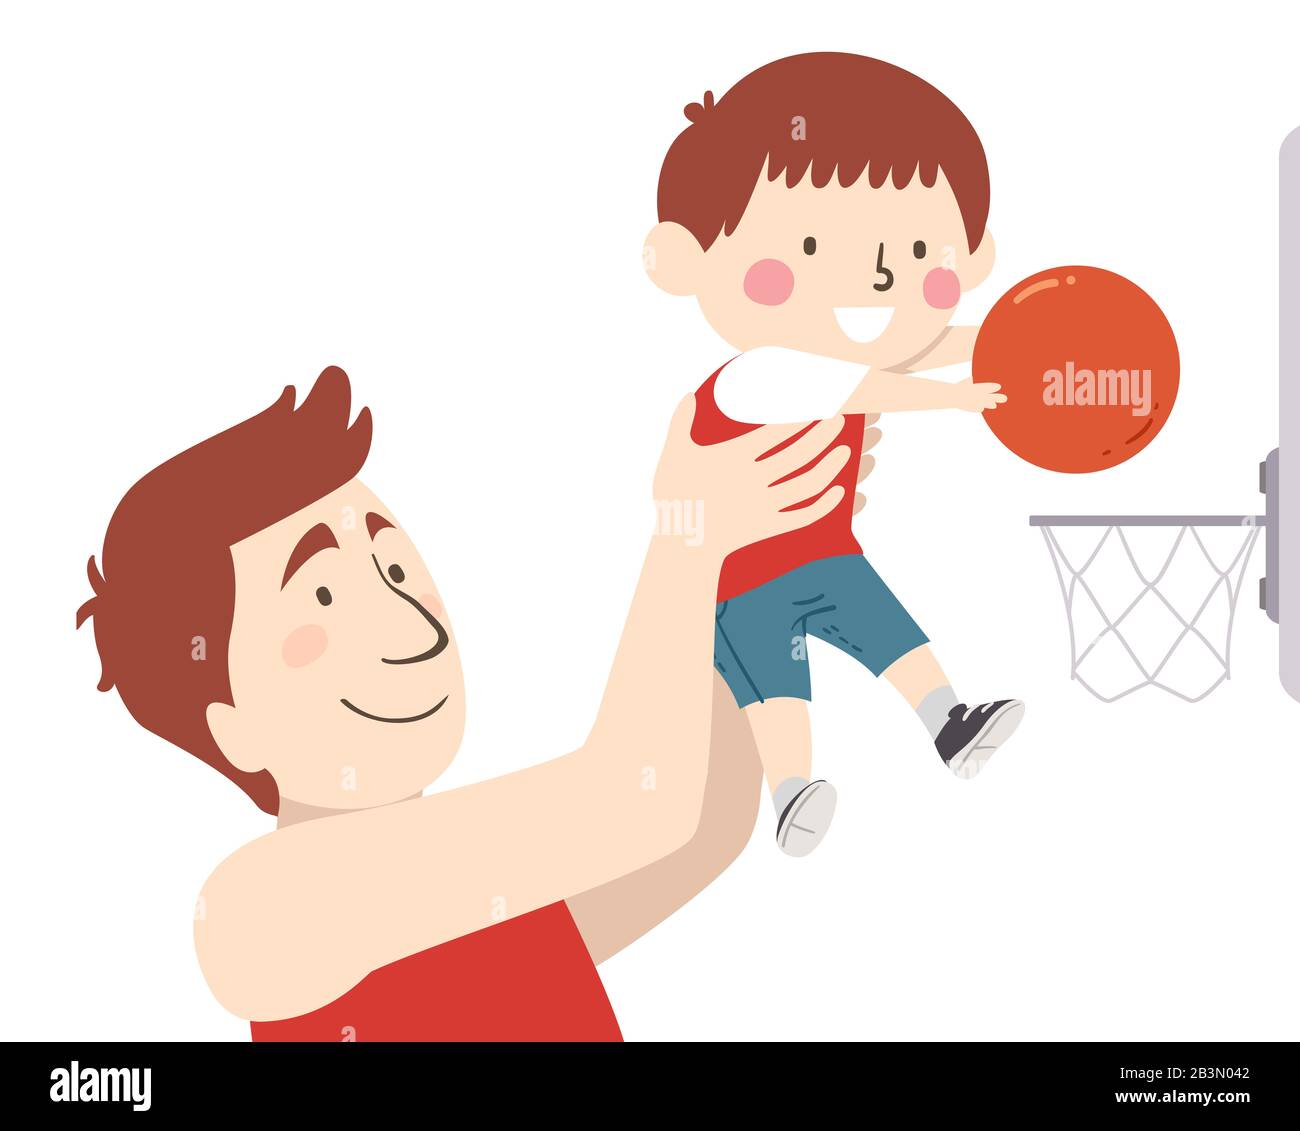 Illustration Of A Kid Boy Shooting The Ball Into Basketball Ring While His Father Lifting Him Stock Photo Alamy